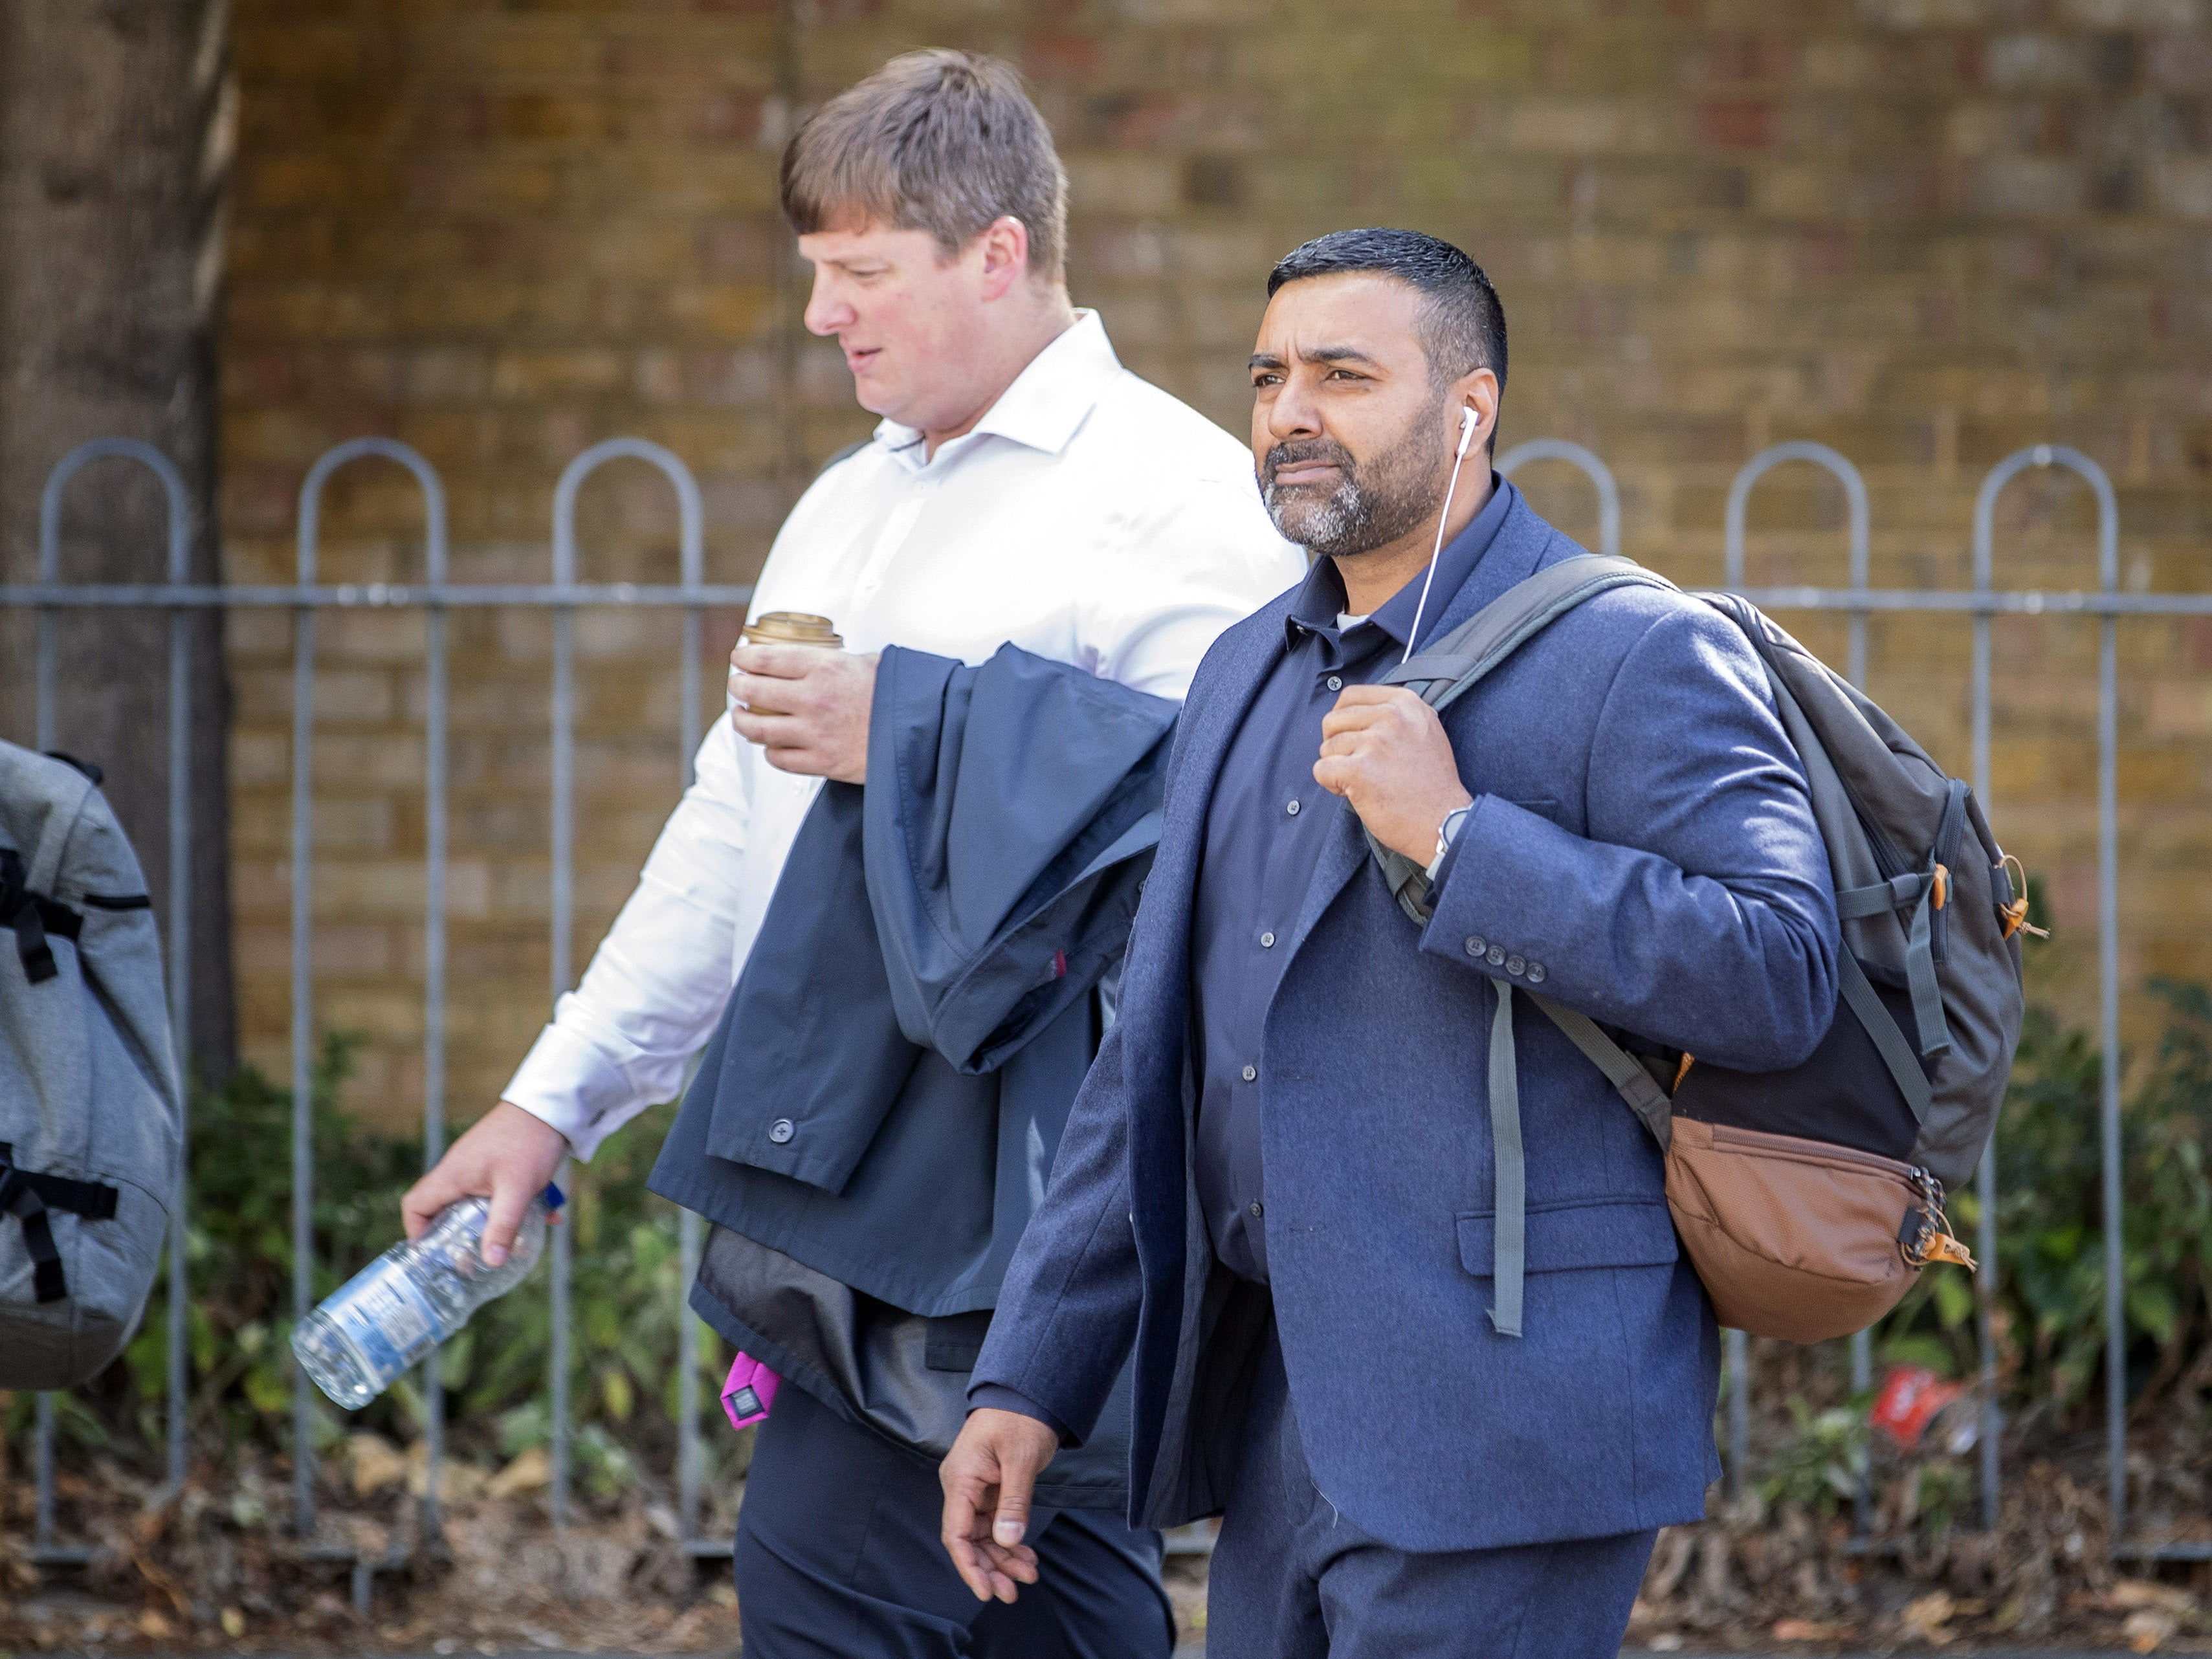 PC Sukhdev Jeer (right) and PC Paul Hefford have been dismissed from the Met Police